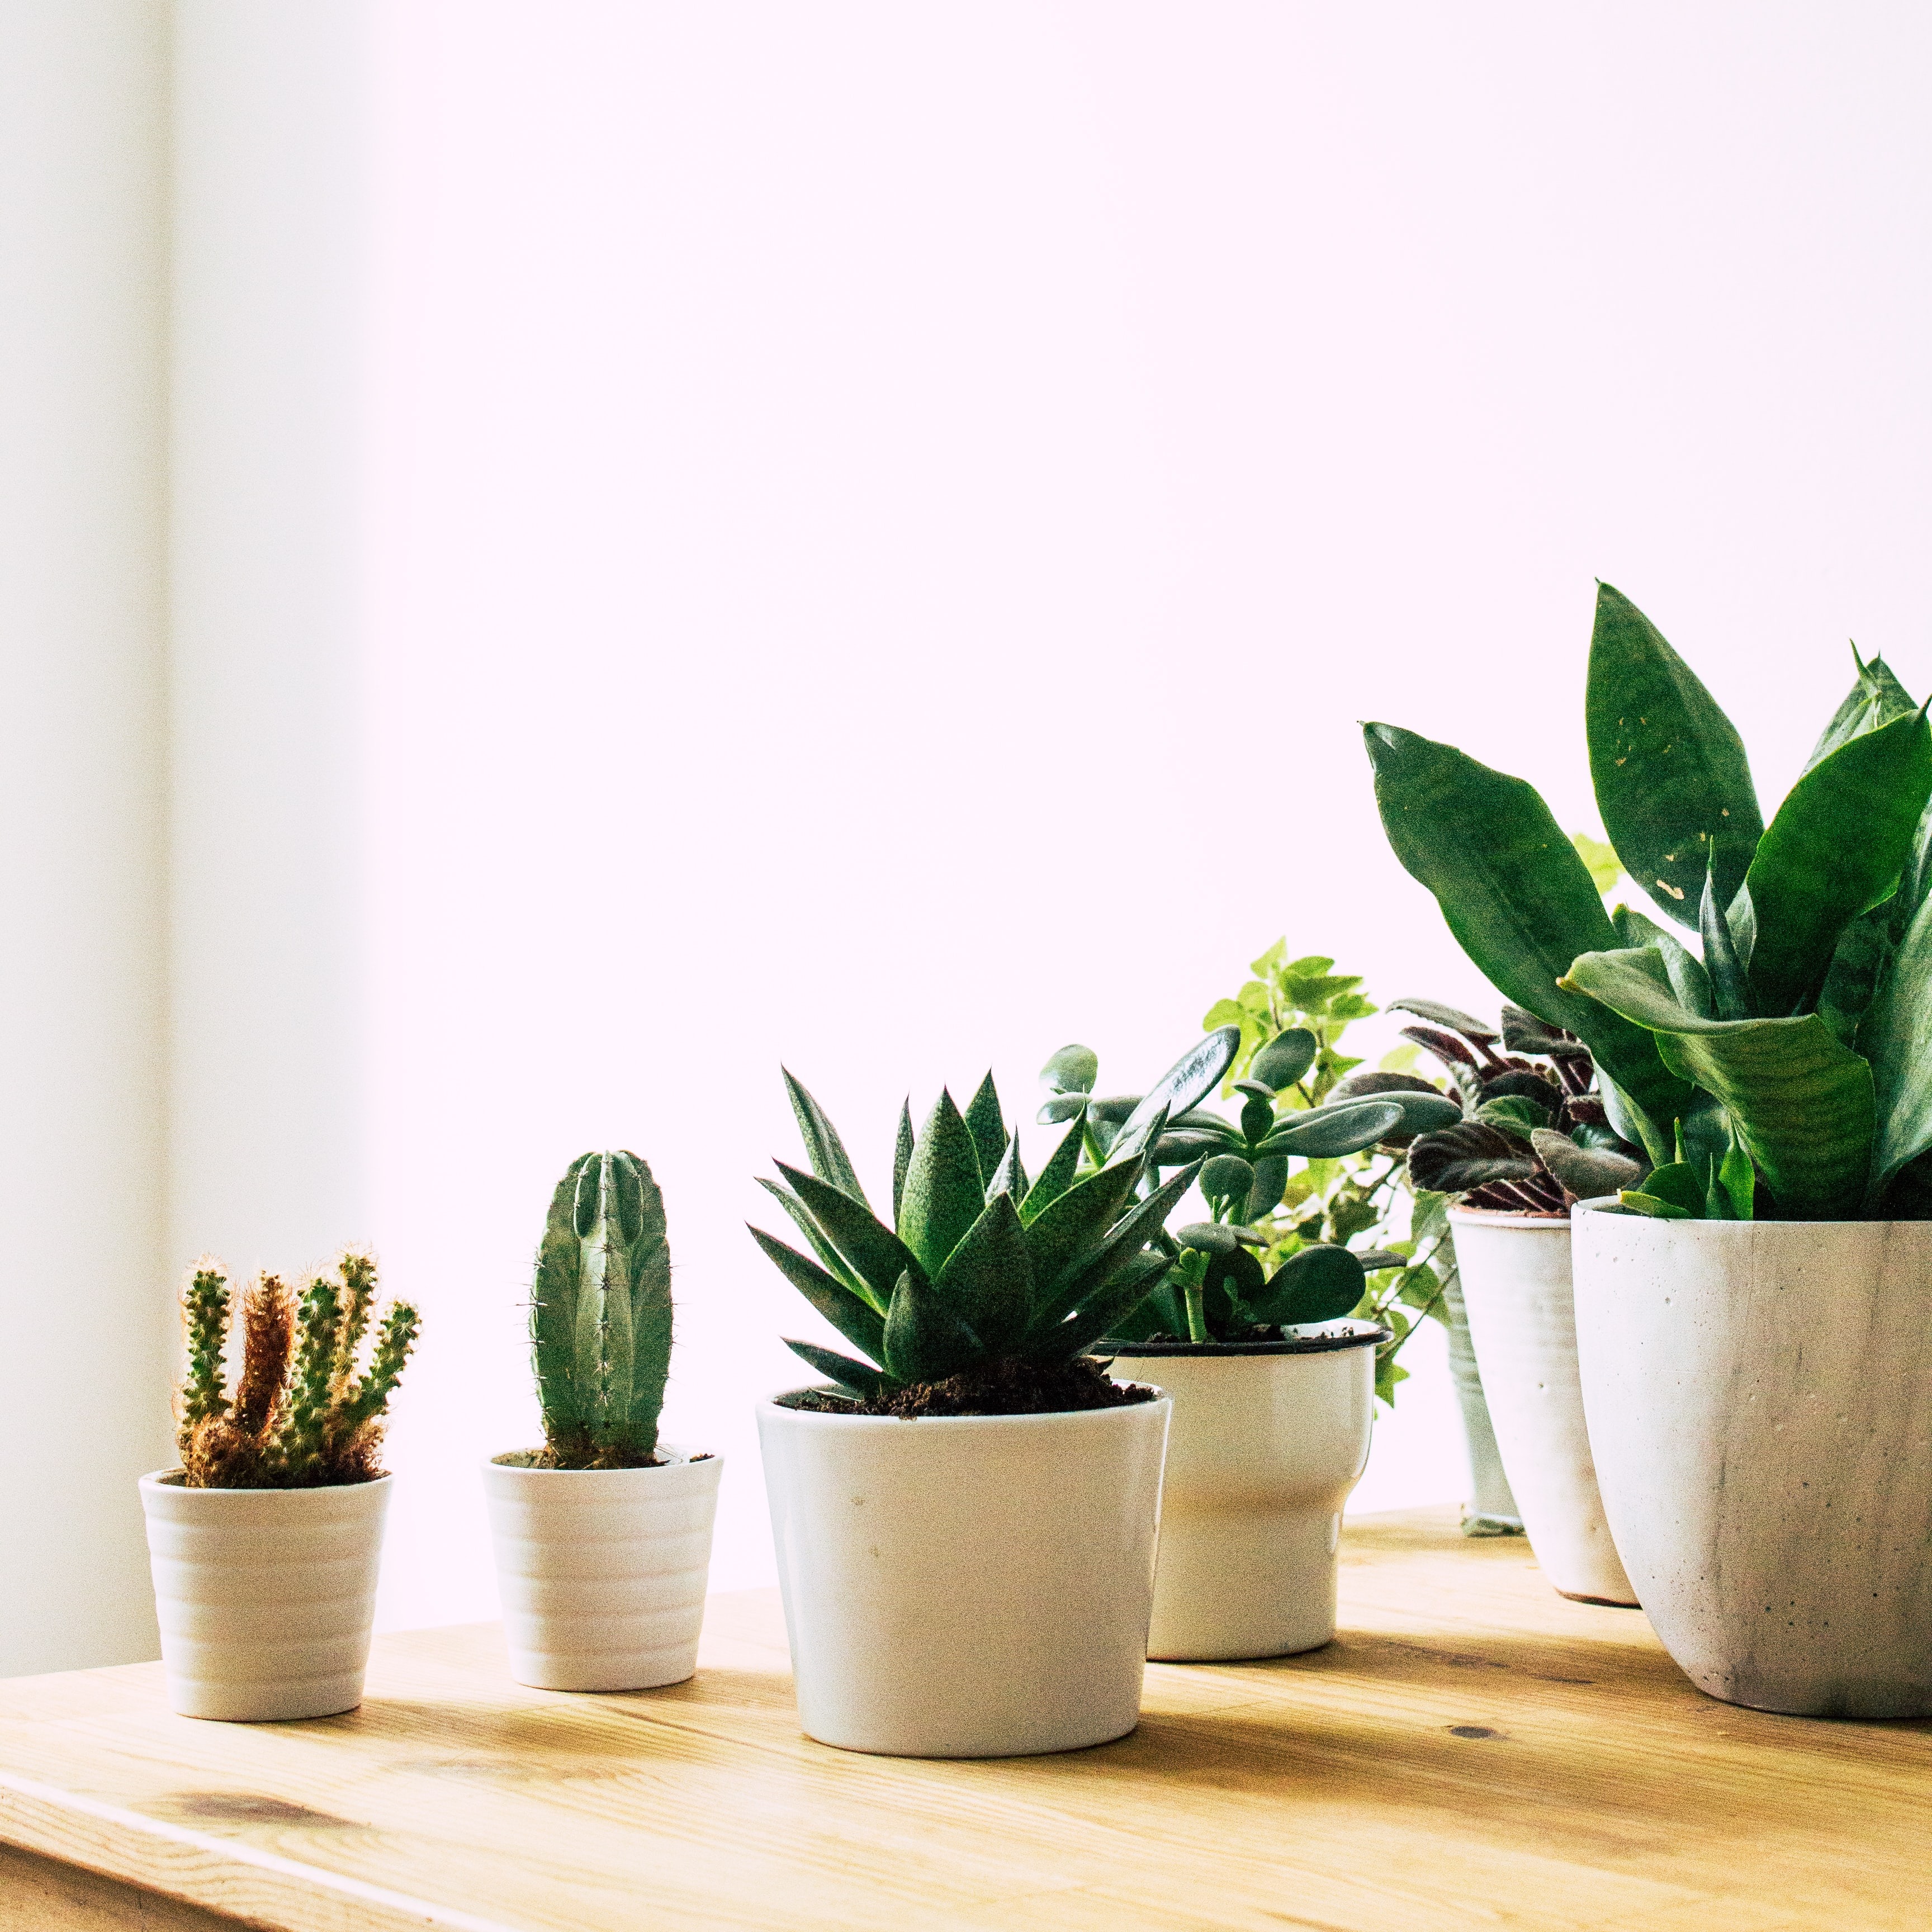 Vacation guide: How to keep your plants alive when you’re not home